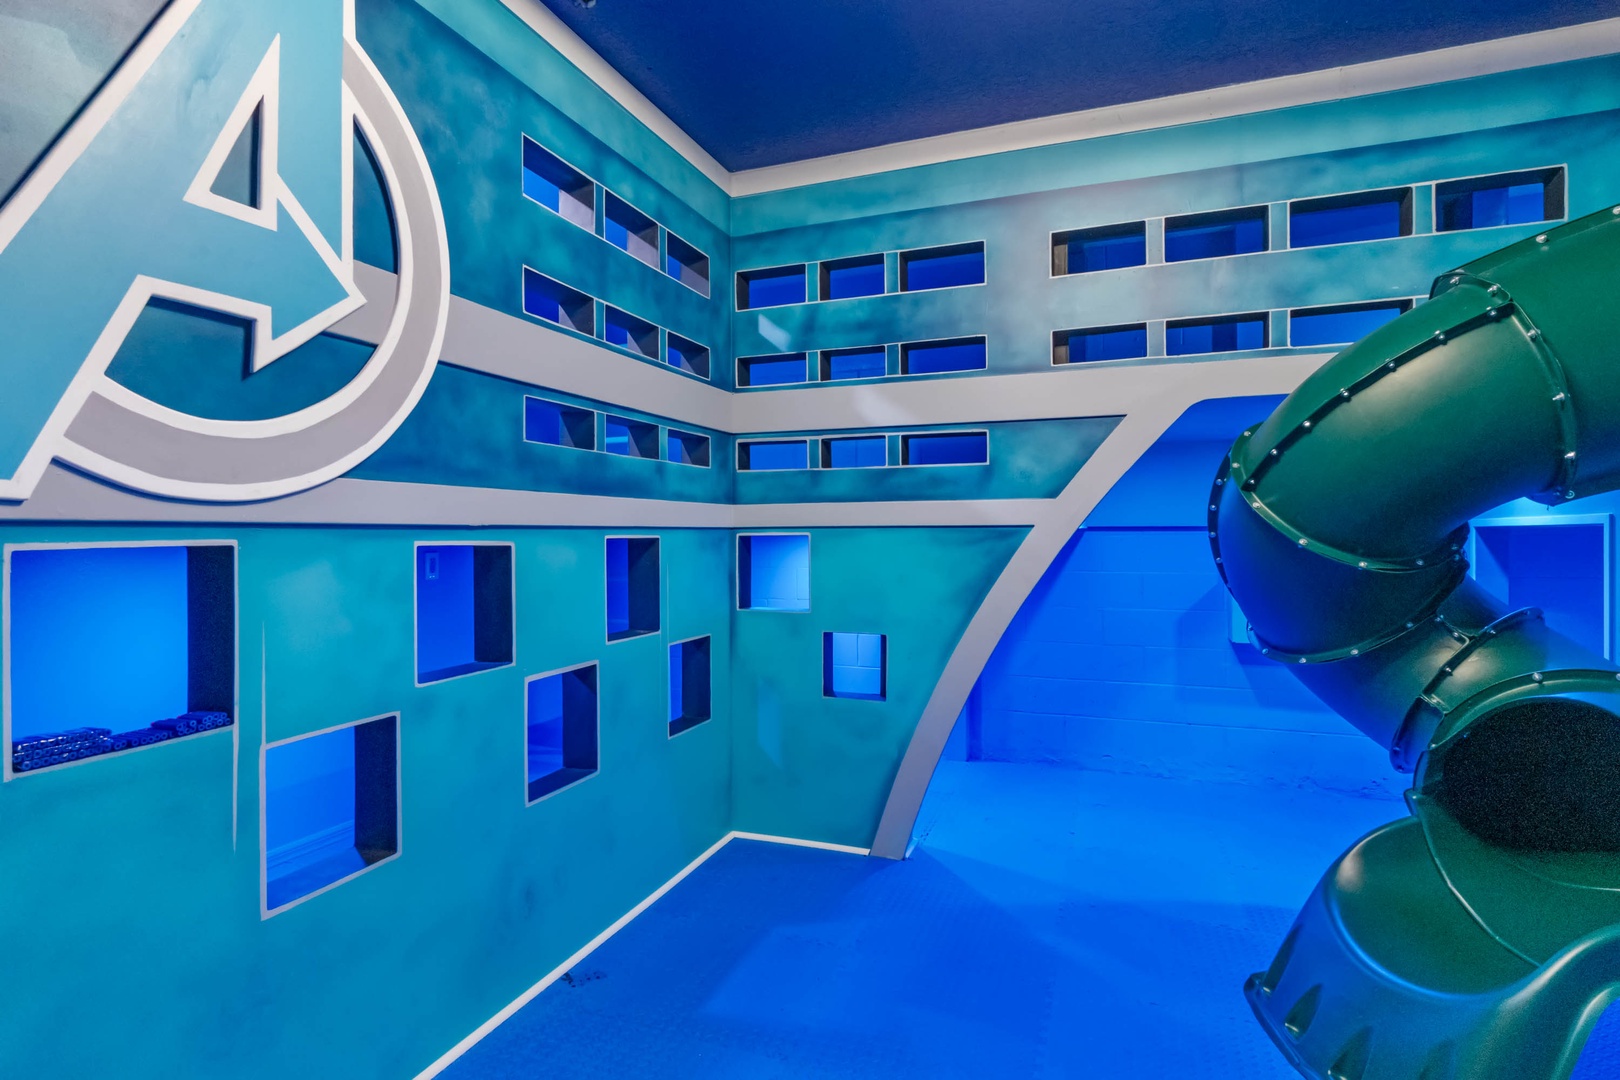 Avengers garage playroom with slide, ball pit, and rock climbing wall